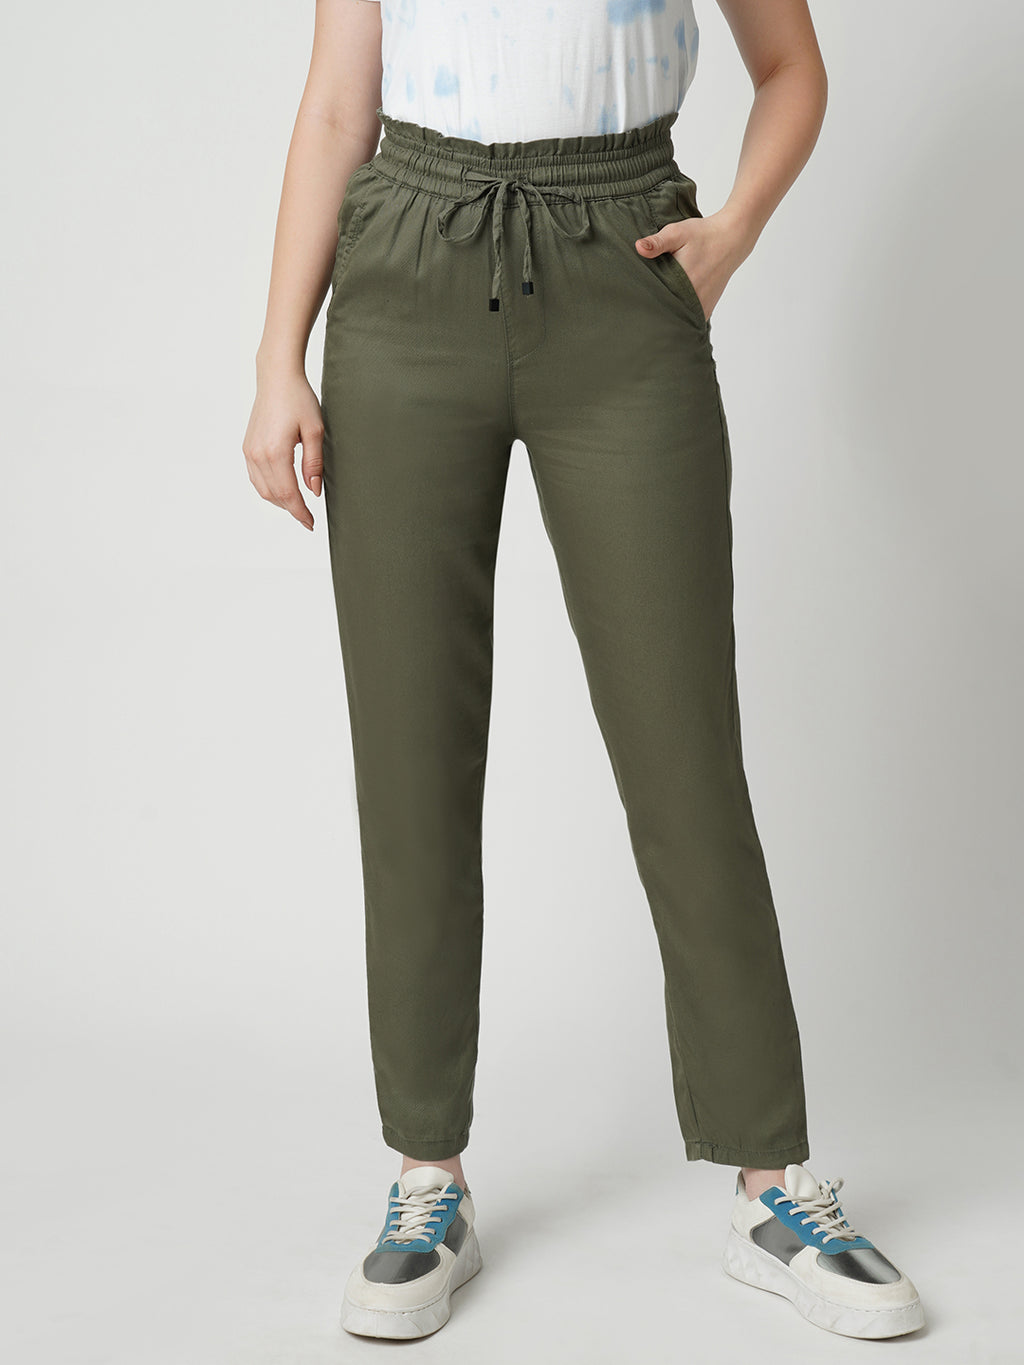 Metietila Women's Casual Paper Bag Pants High Waisted Tie Pencil Pant  Trousers with Pockets Army Green XL at Amazon Women's Clothing store